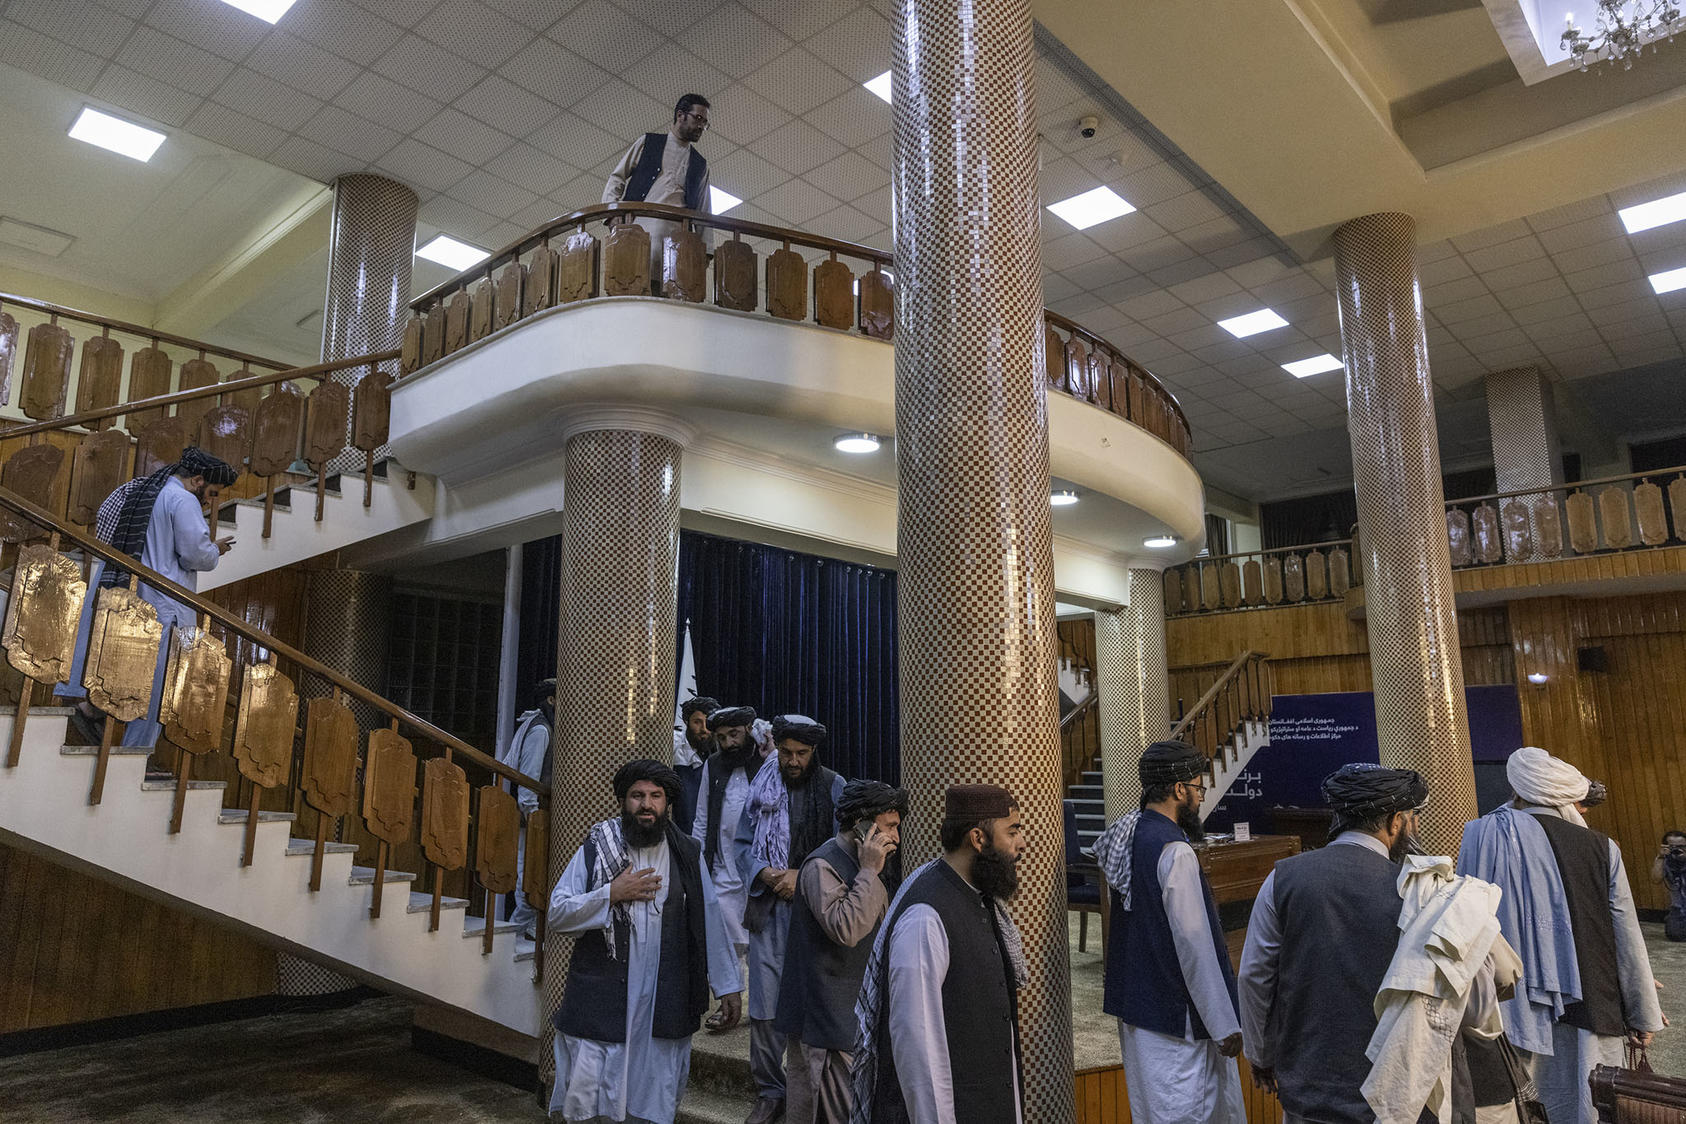 Taliban officials arrive at a news conference to announce an acting cabinet for the new Taliban government in Kabul. September 7, 2021. (Victor J. Blue/The New York Times)